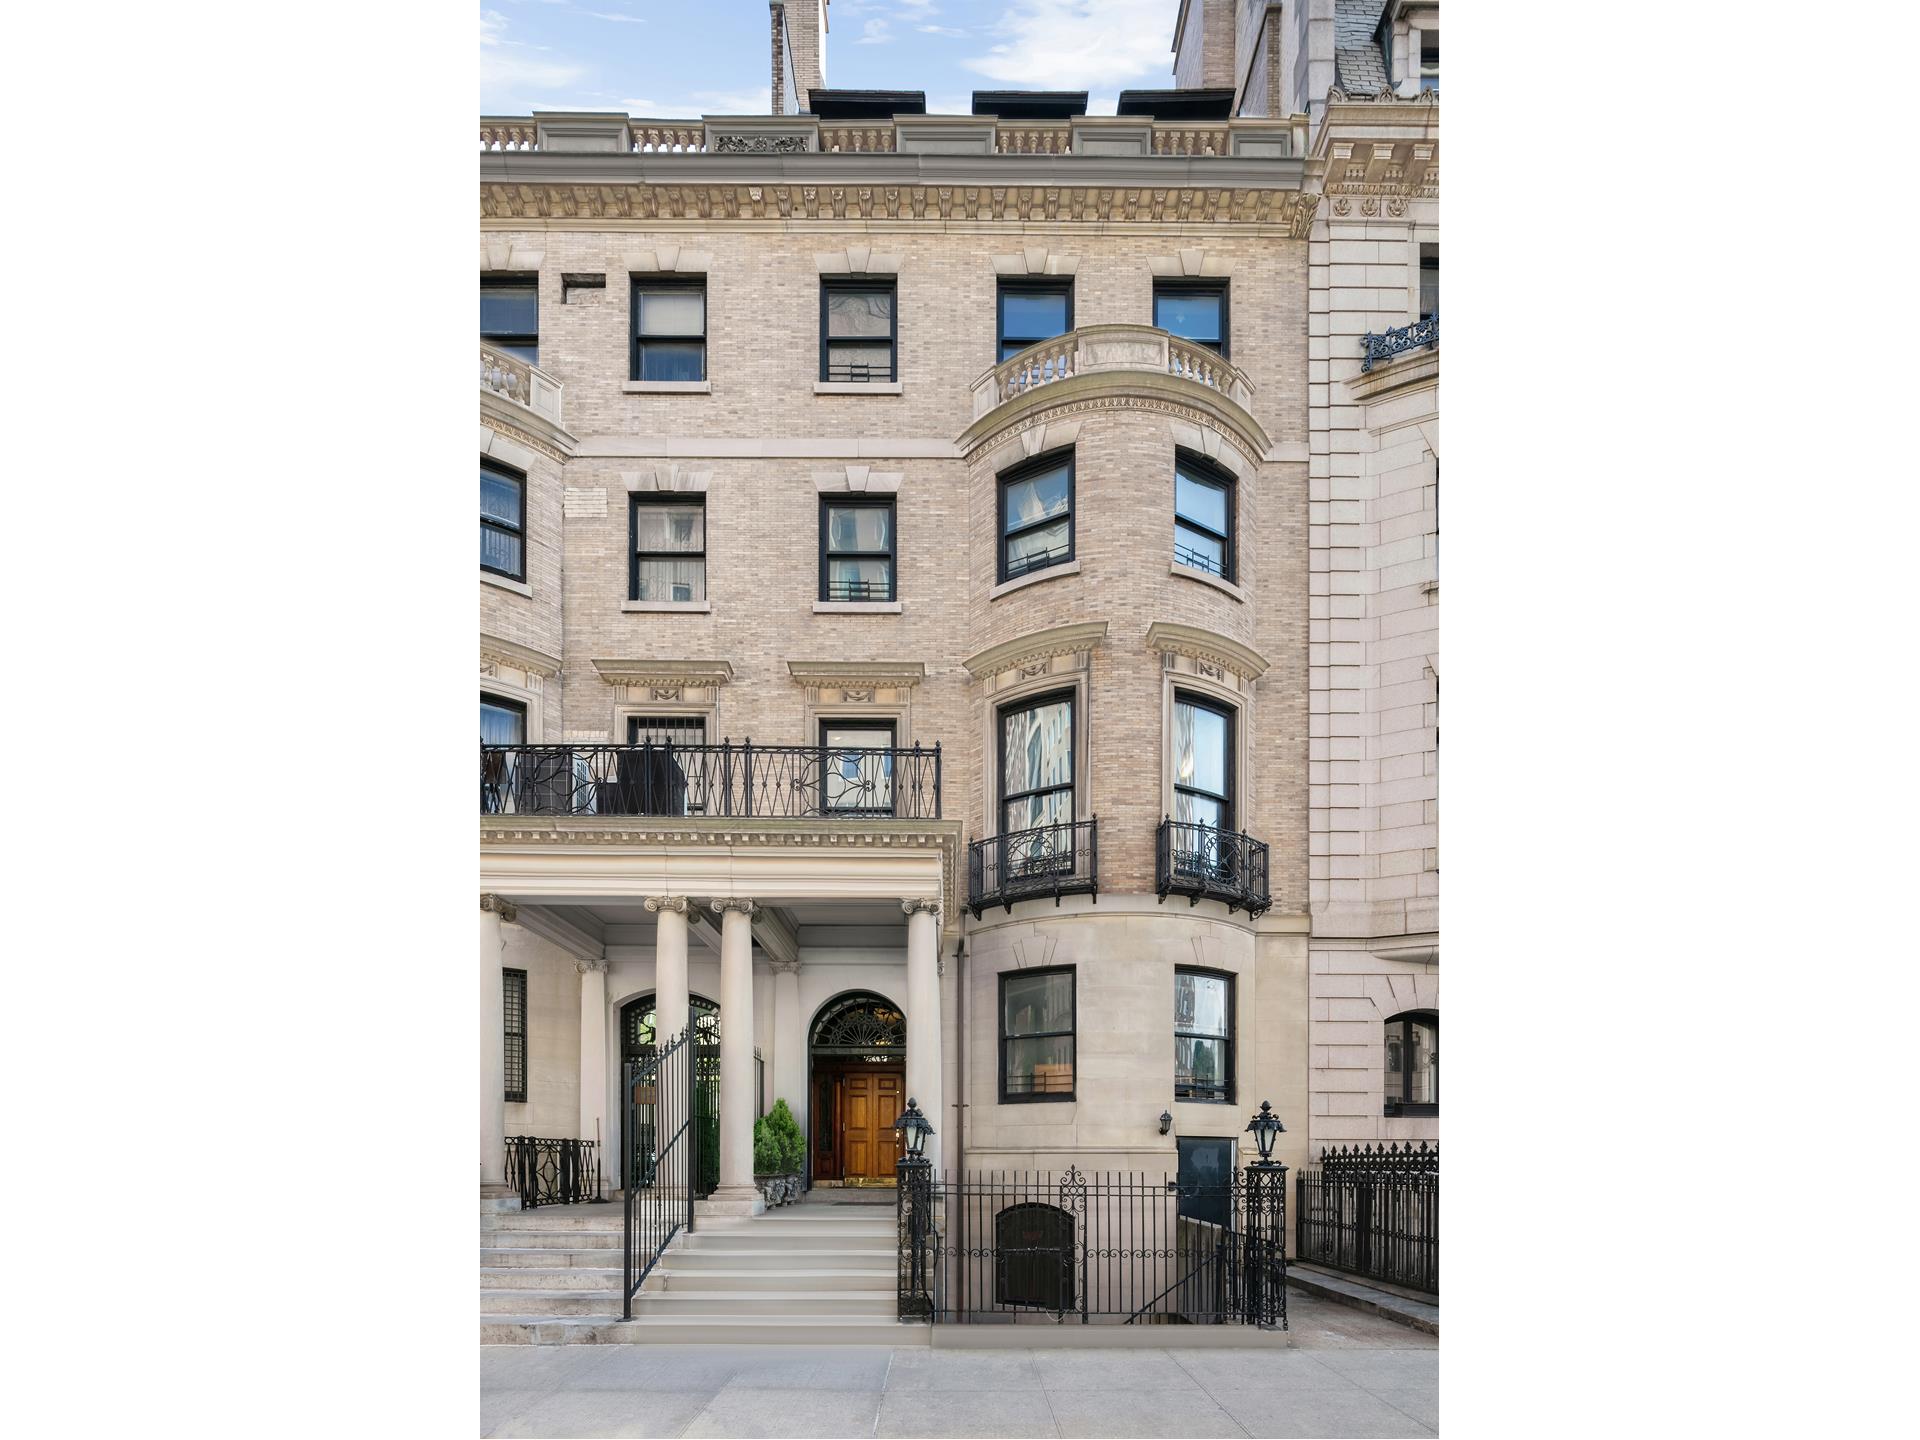 12 East 79th Street, Lenox Hill, Upper East Side, NYC - 8 Bedrooms  
10 Bathrooms  
17 Rooms - 